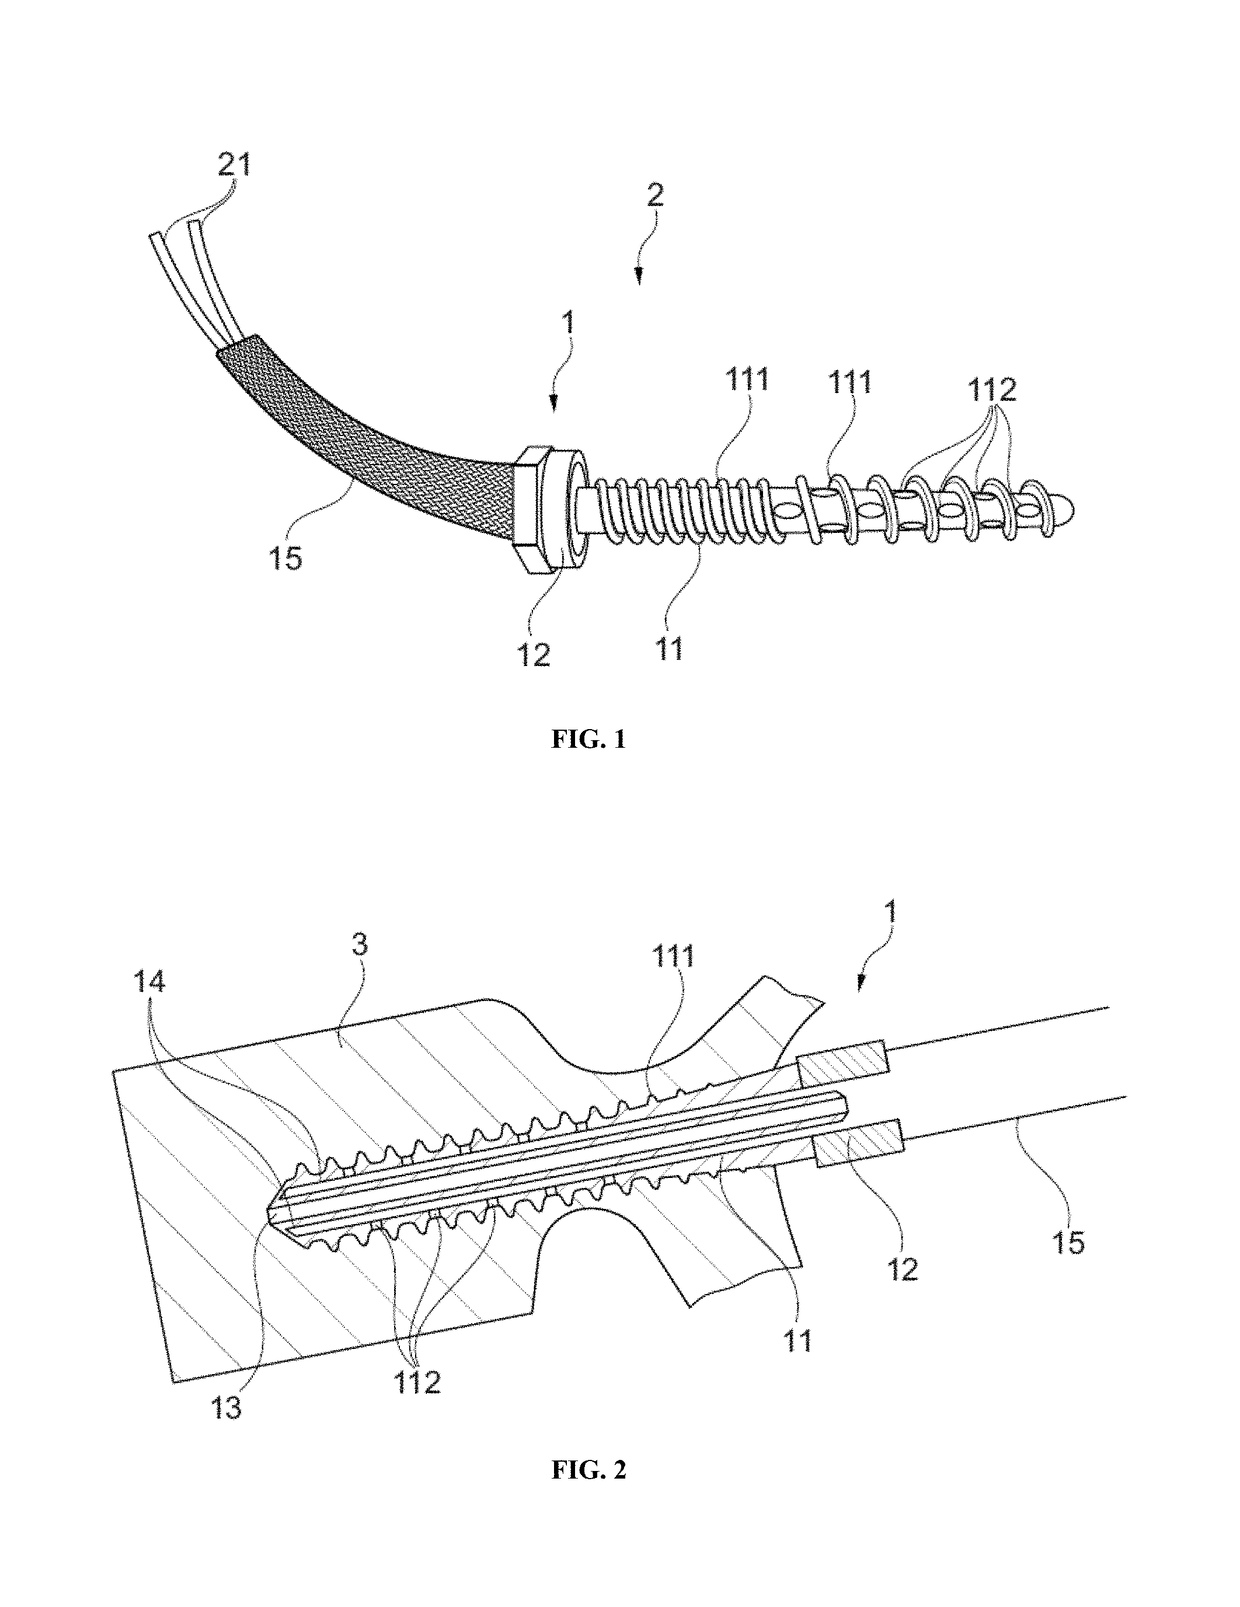 Cannulated bone screw and methods of use therefof